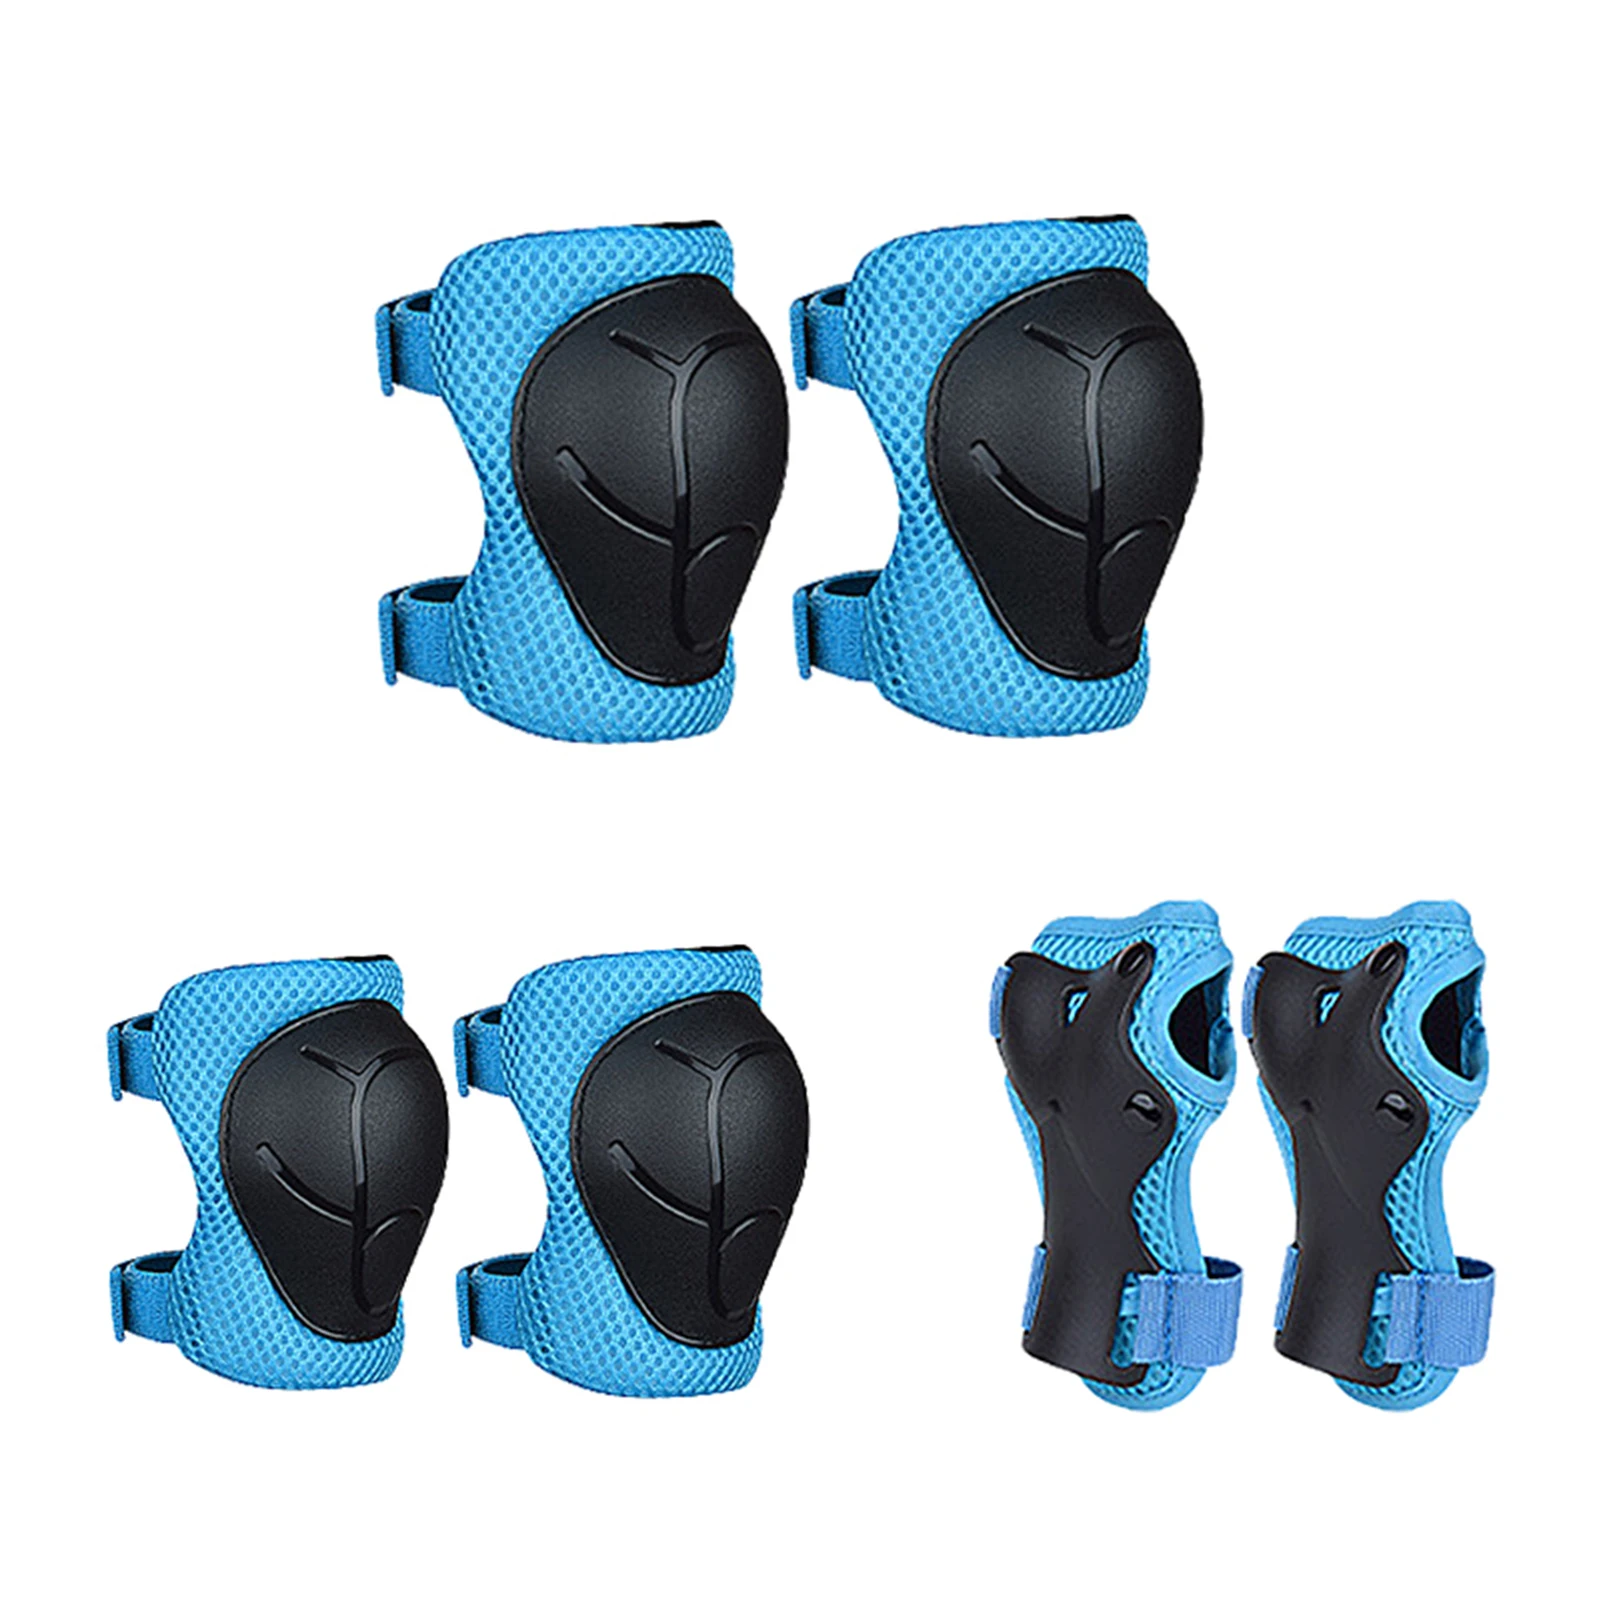 Details about   Set With Wrist Guard Adjustable Kids Pads Elbow Pads Protective Gear Knee 6 In1 